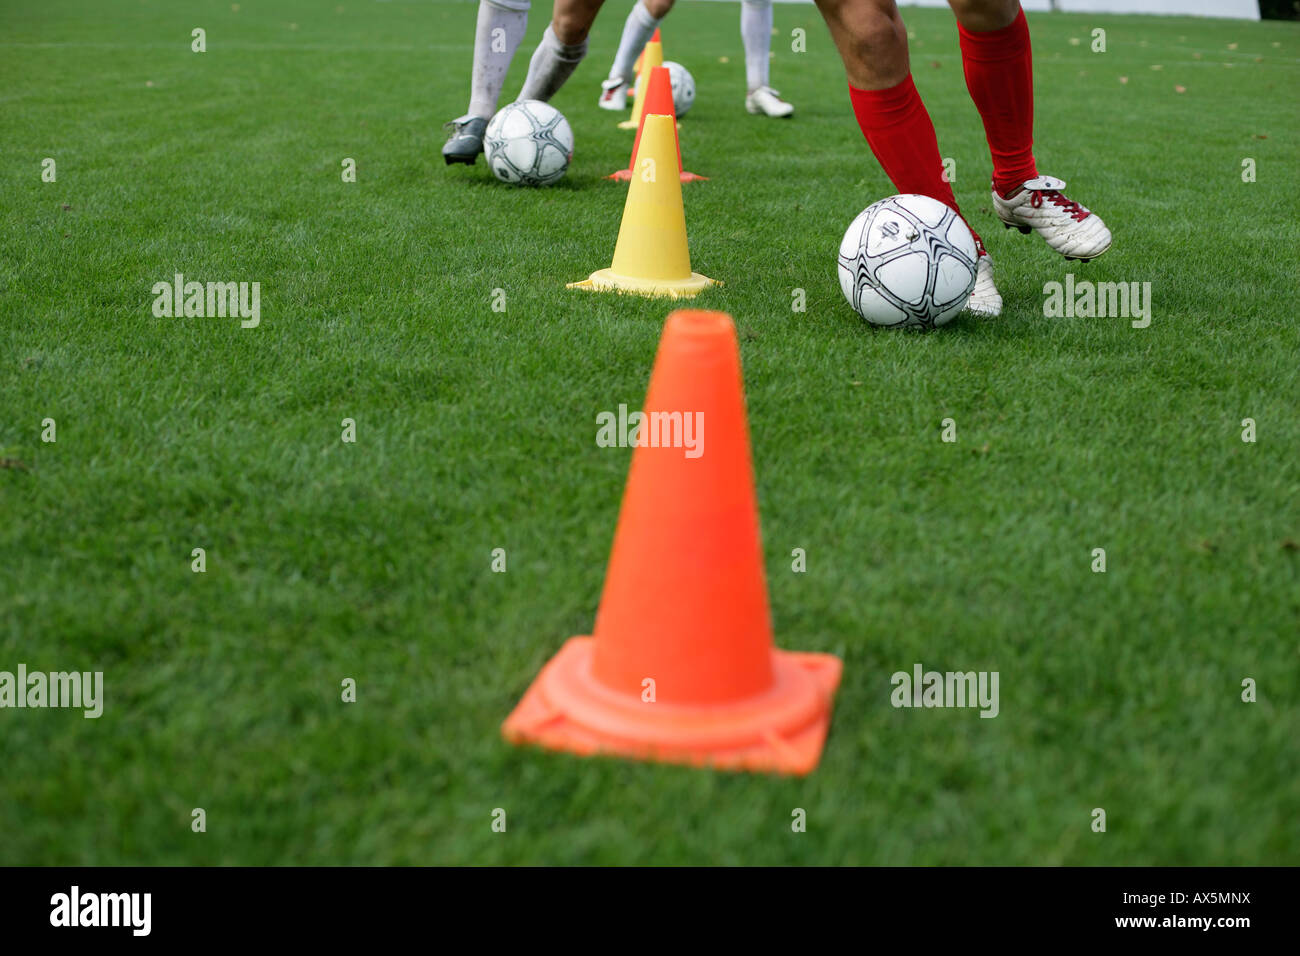 Soccer player running slalom with football around marks Stock Photo